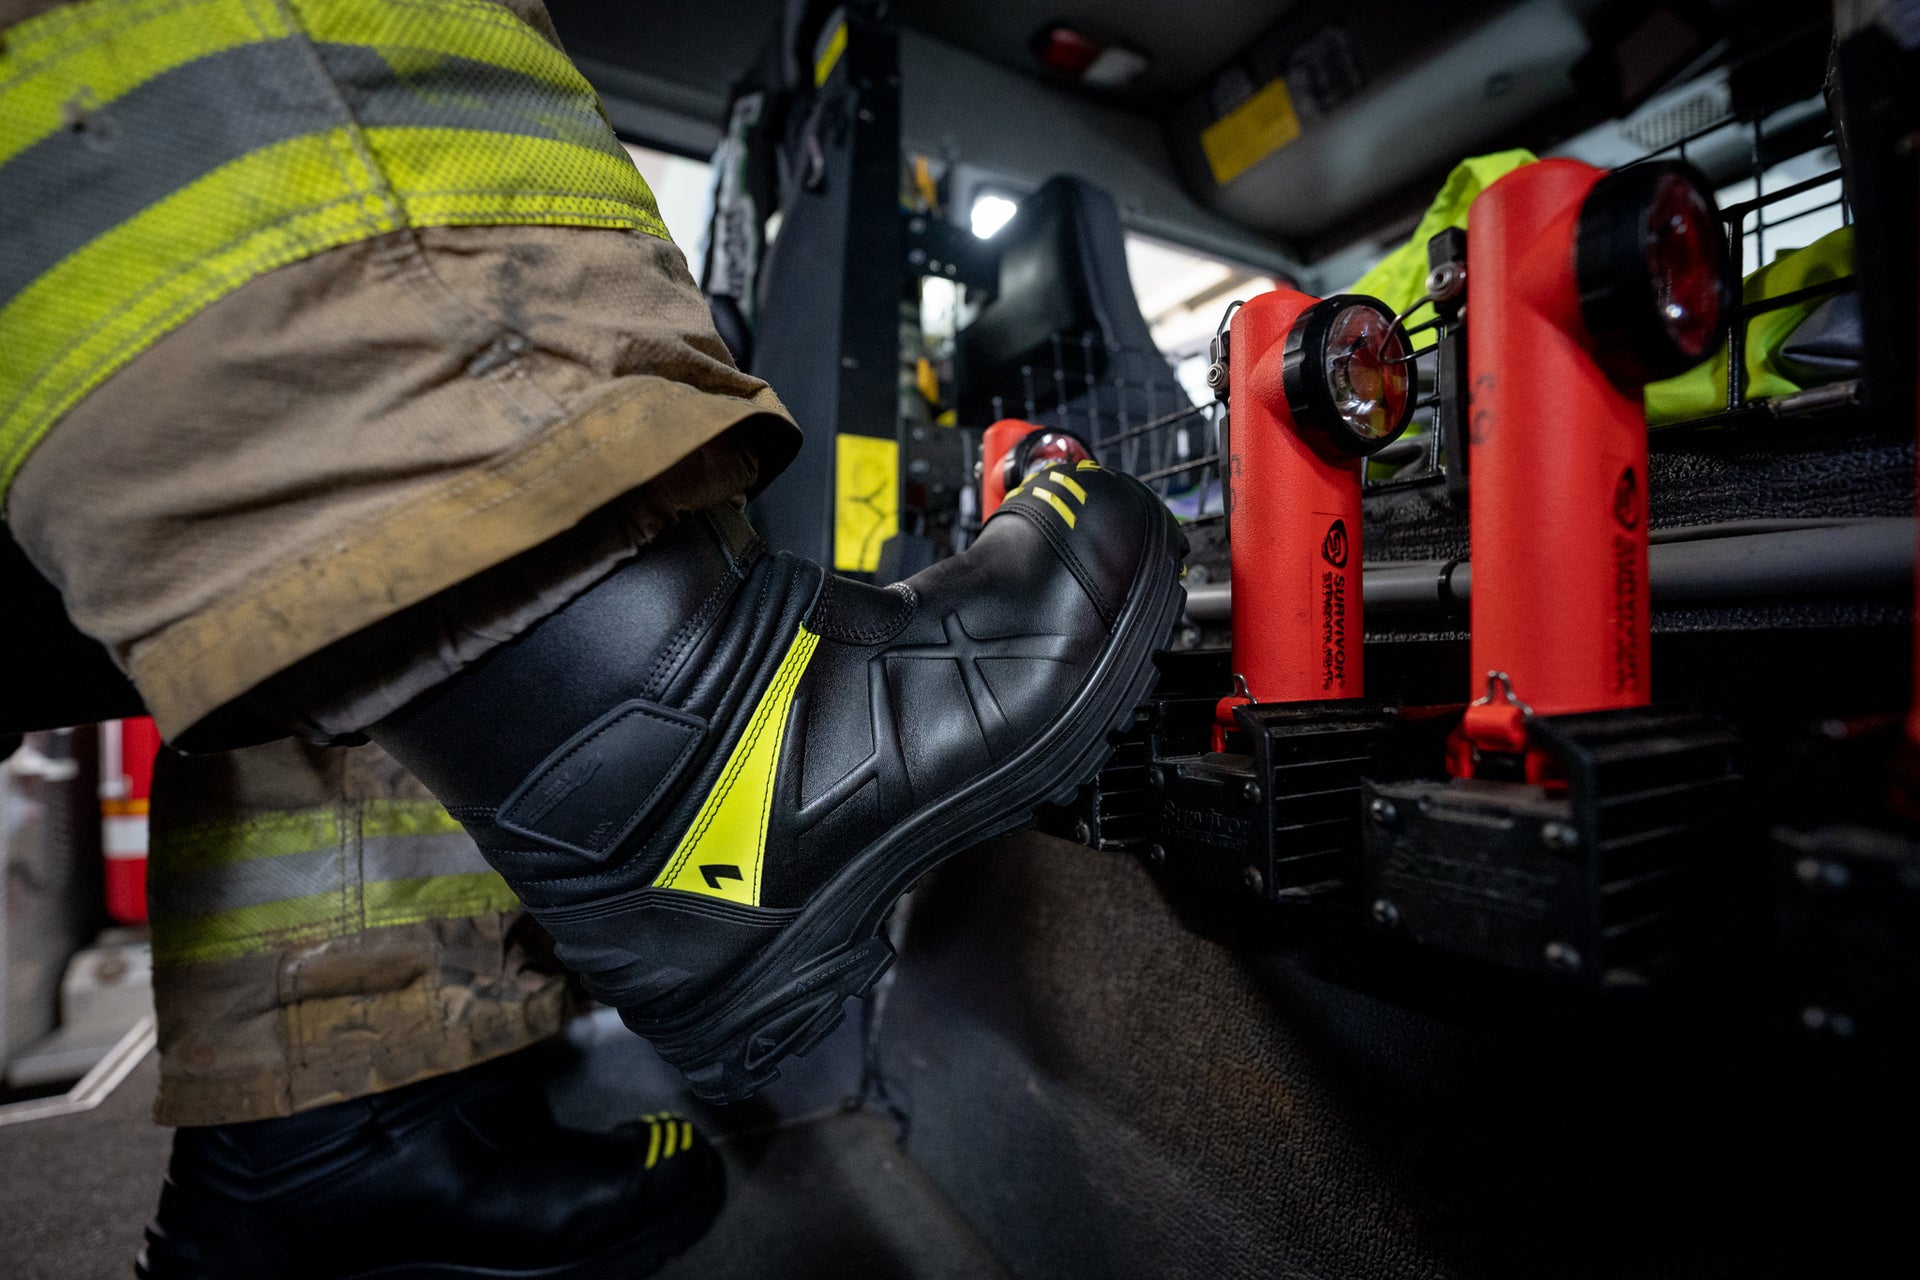 HAIX launches the FIRE EAGLE 2.0 - Emergency Services Times